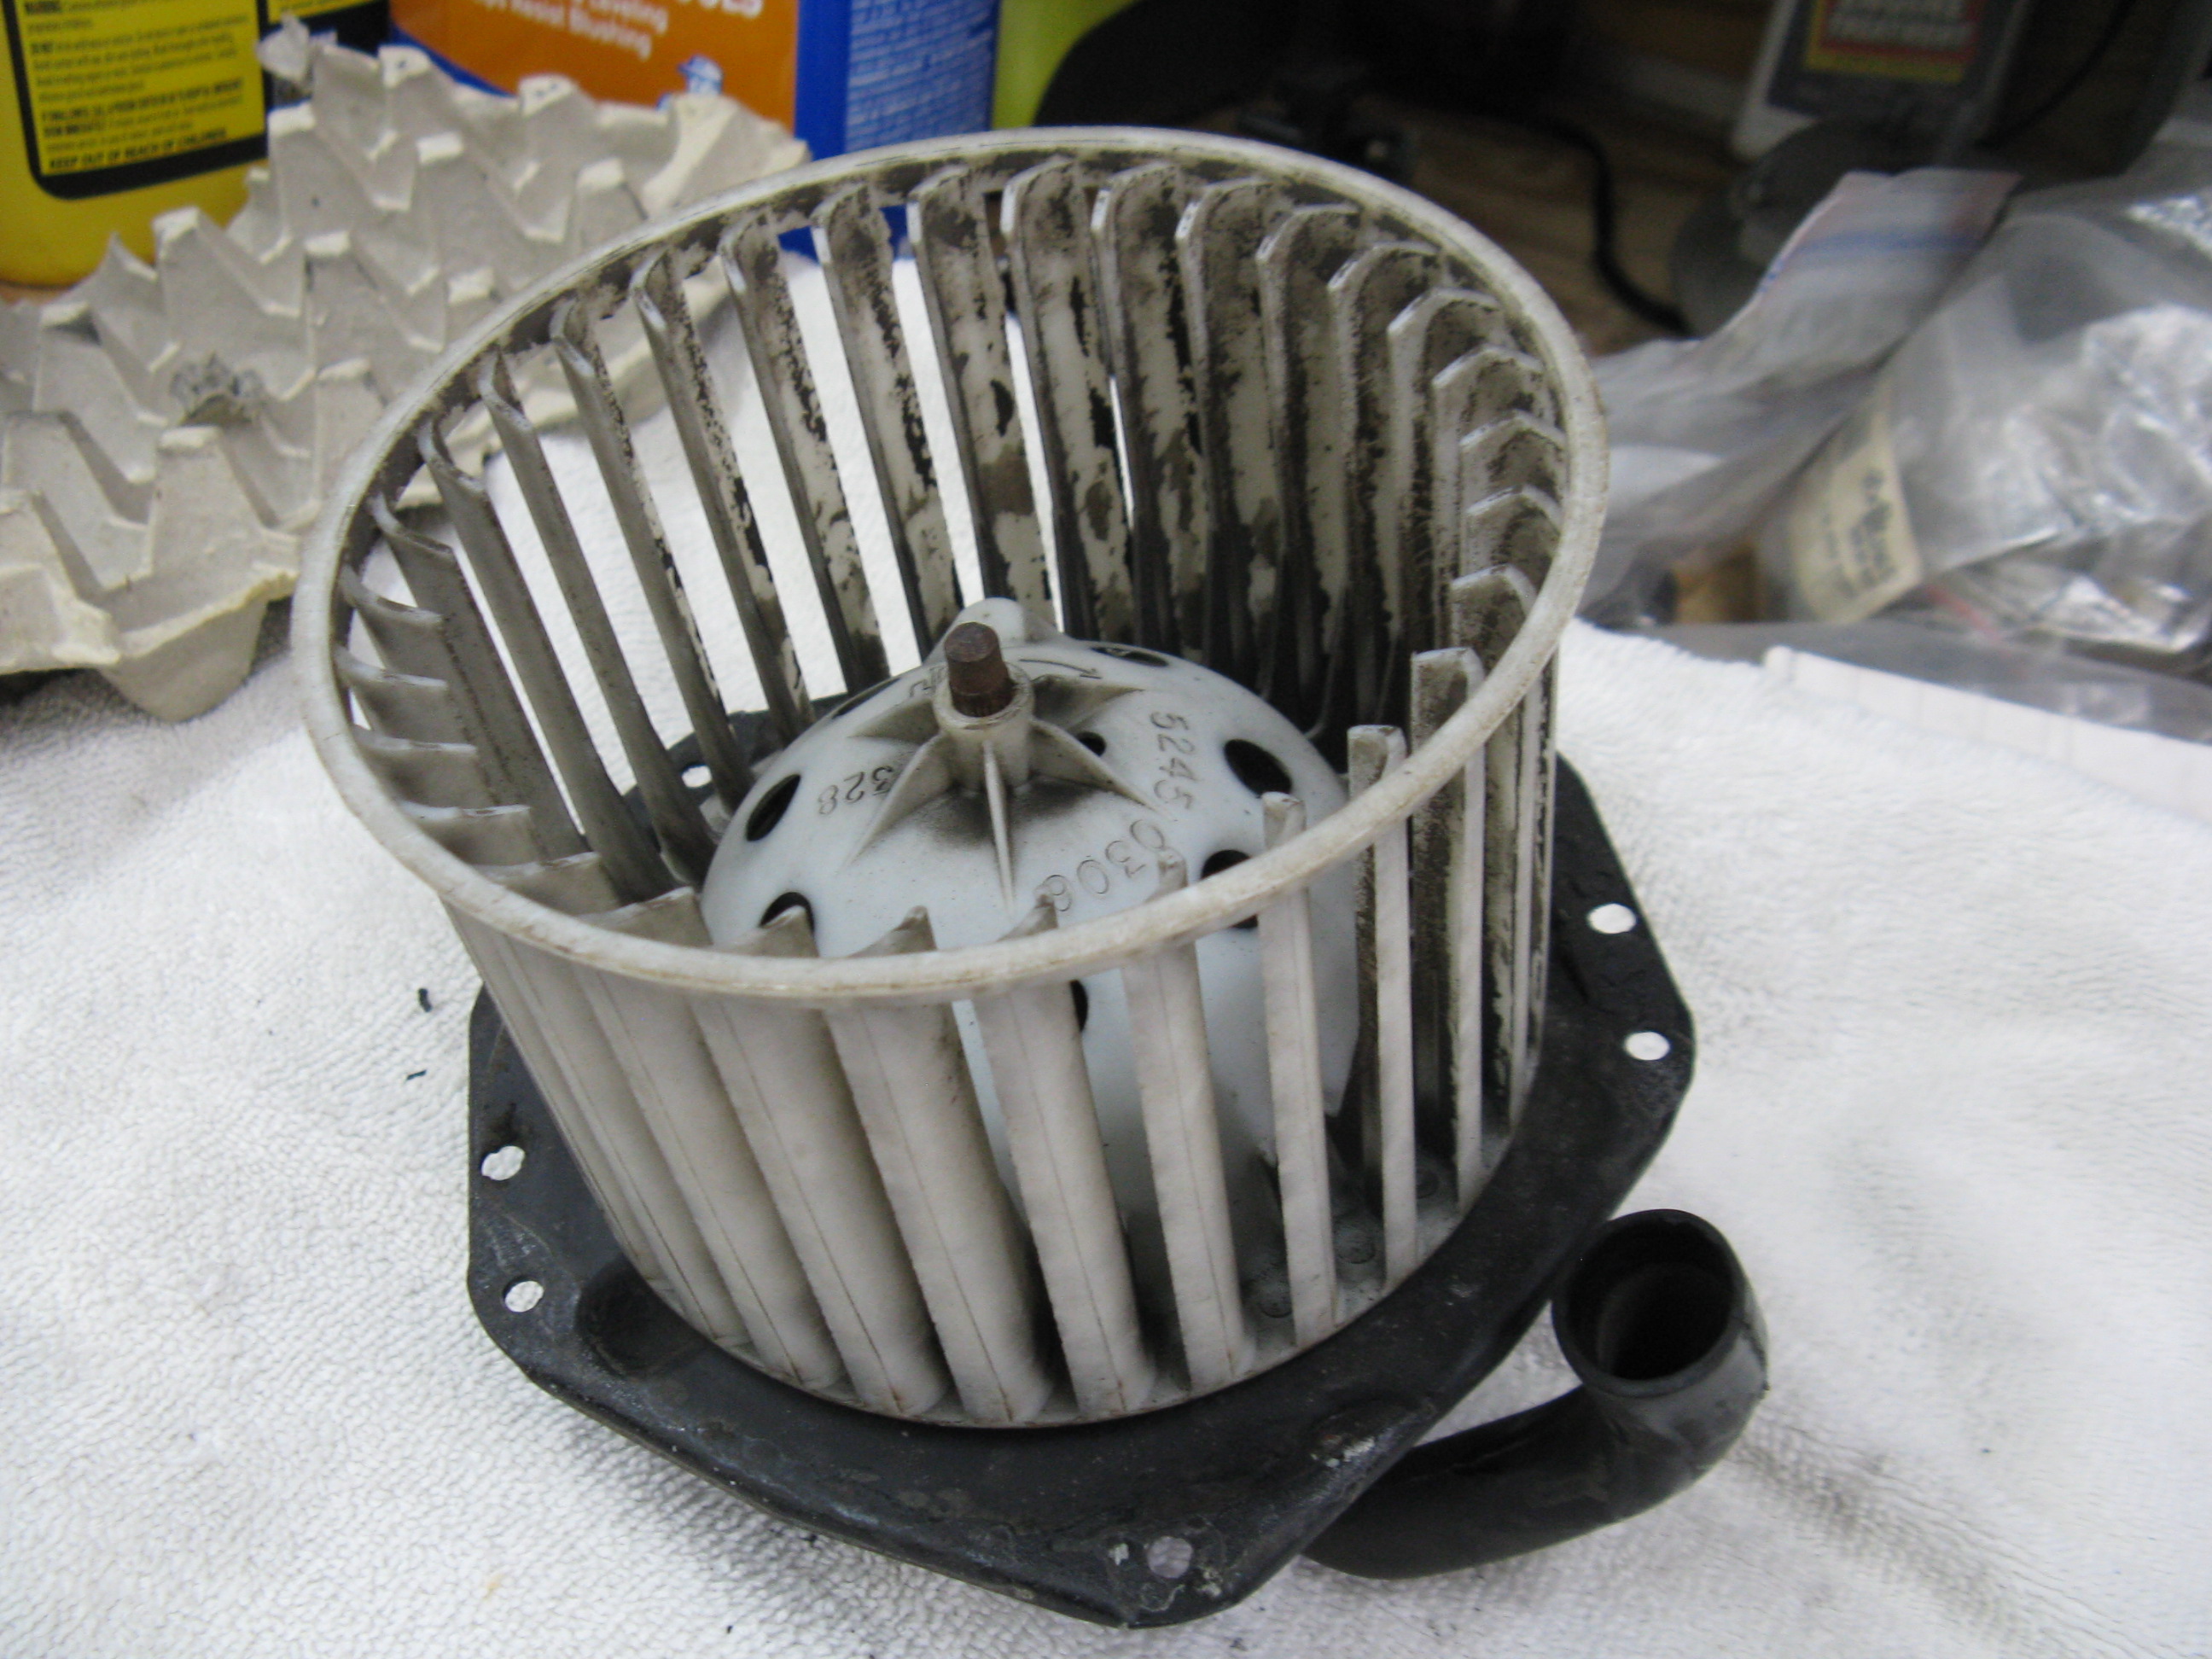 Heater Blower Motor Replacement- What You Need to Know